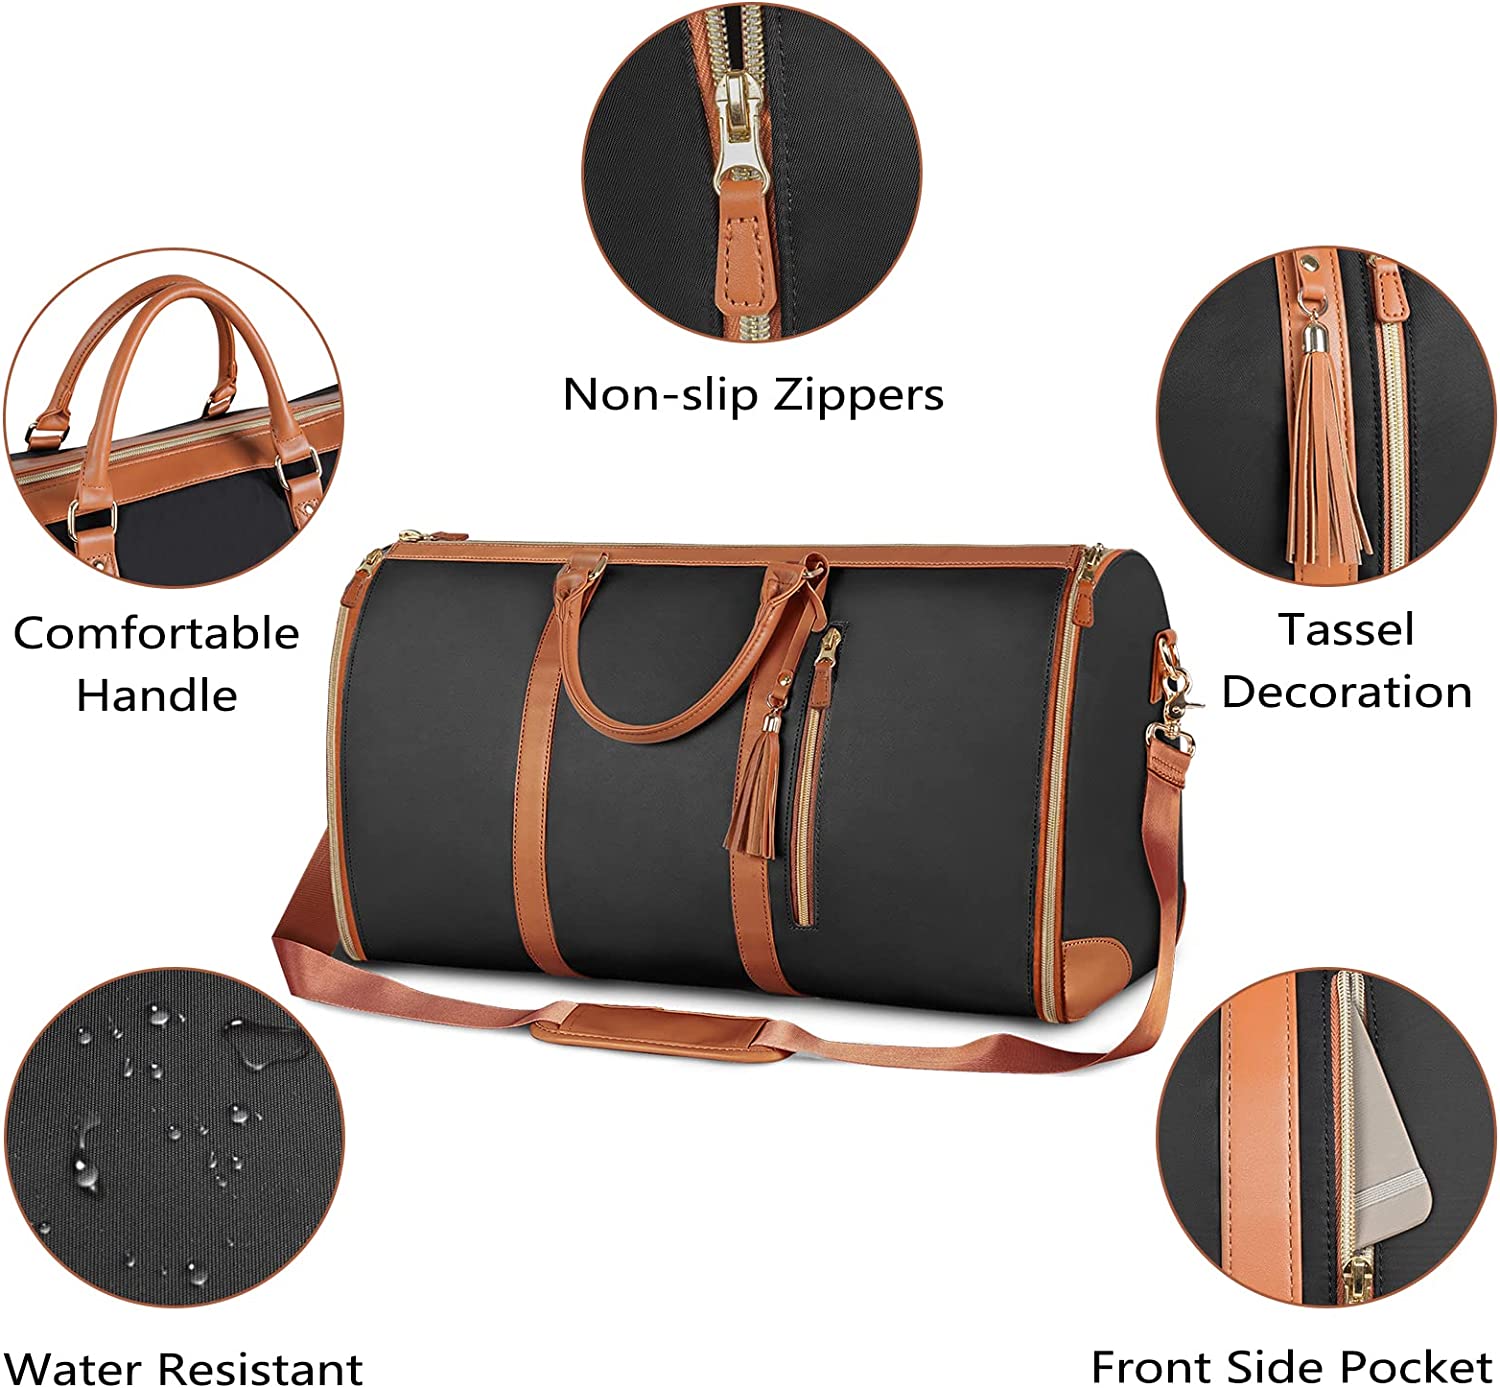 The Convertible Duffle